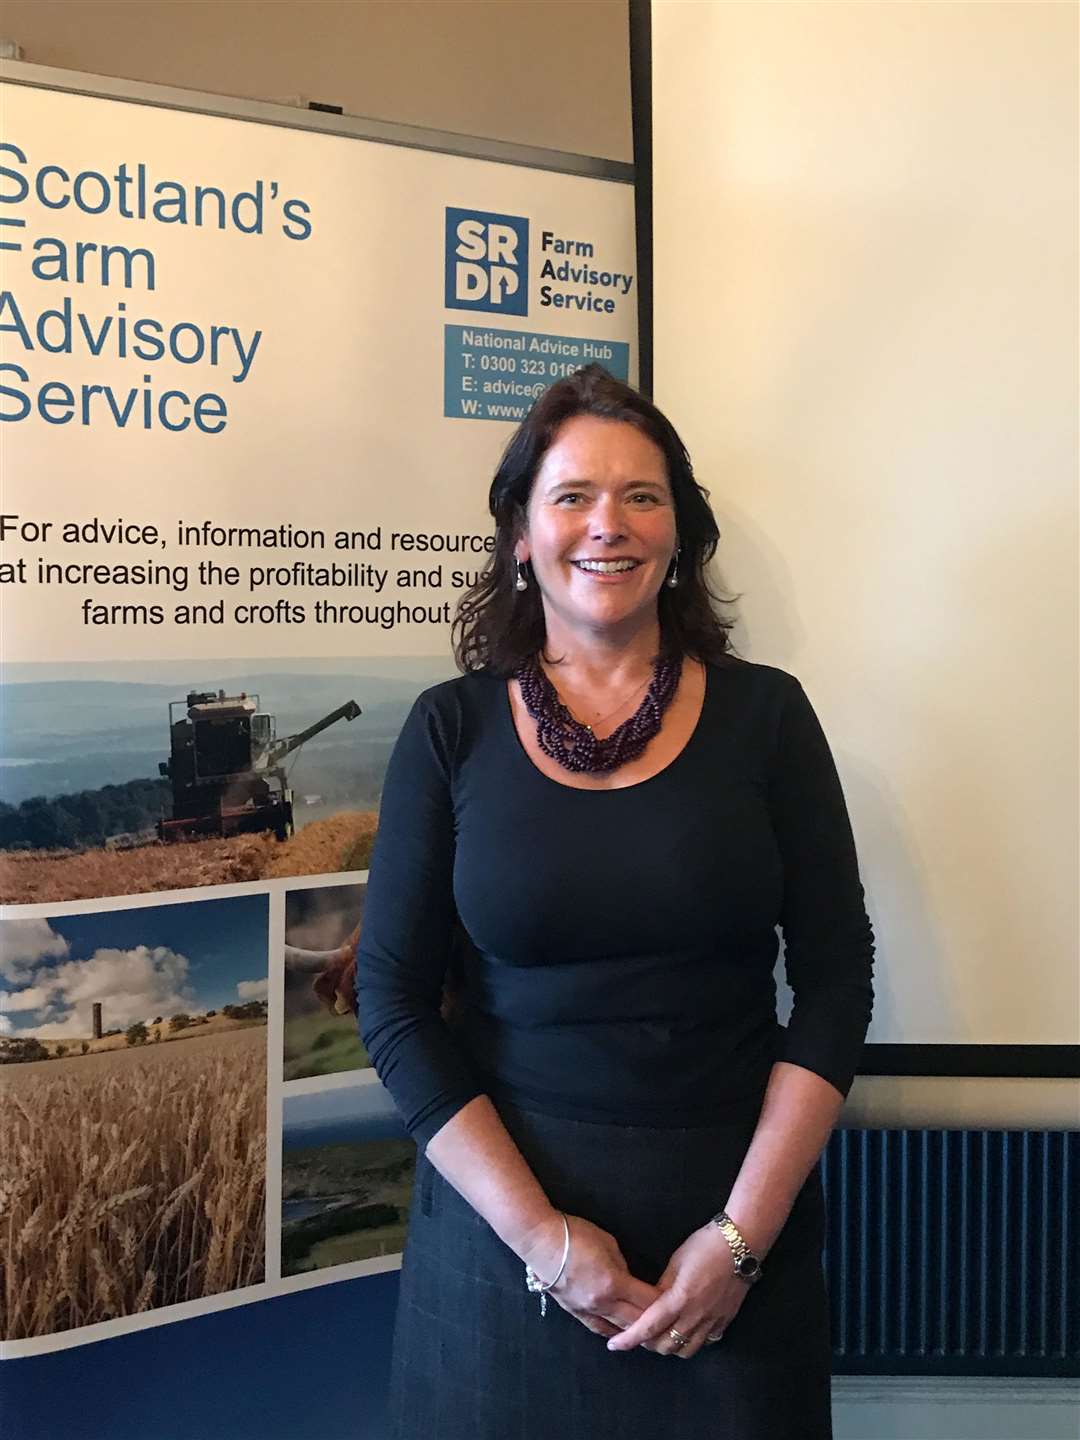 Heather Wildman of Saviour Associates who gave an insight into succession planning at the event in Halkirk.